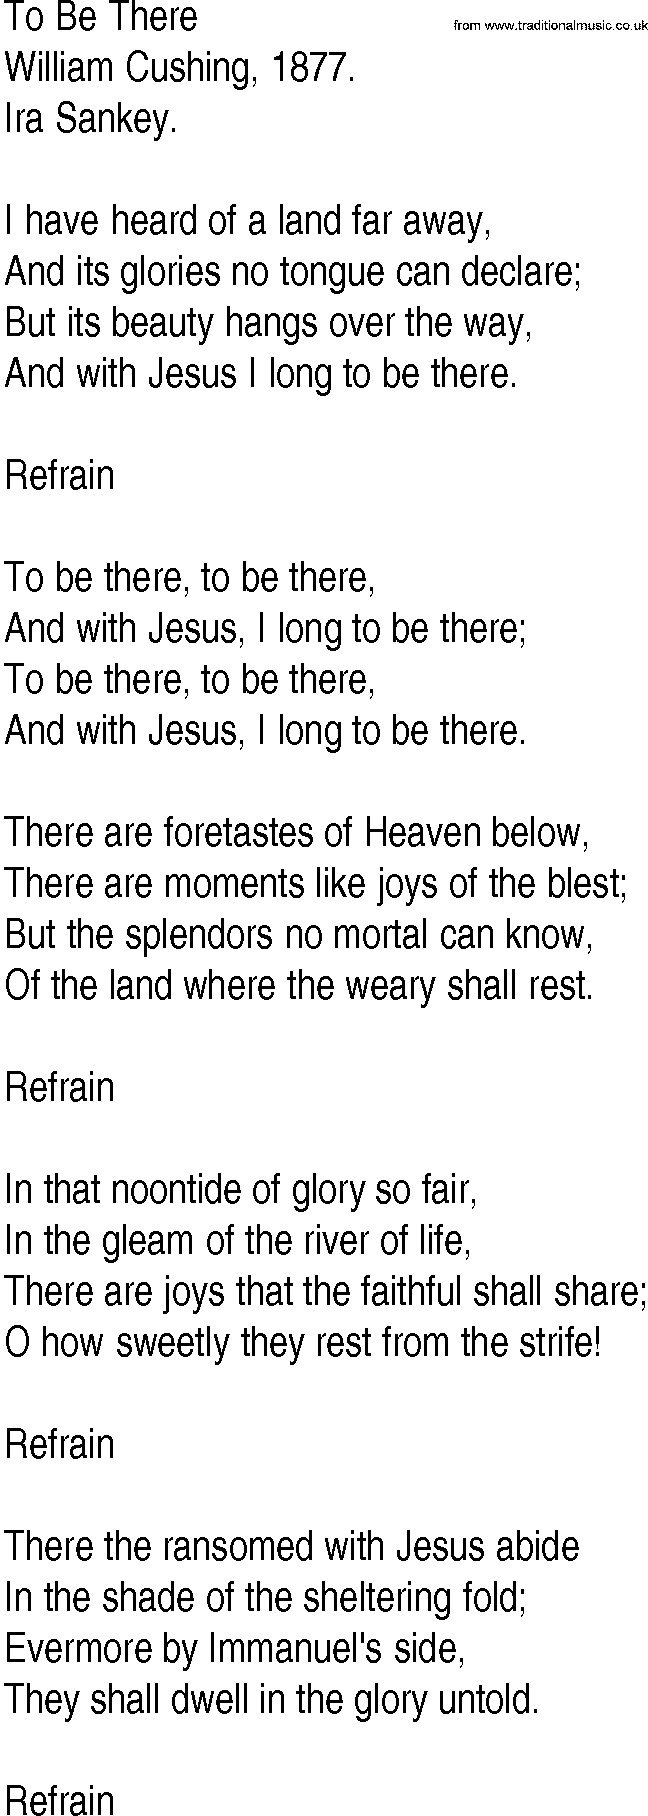 Hymn and Gospel Song: To Be There by William Cushing lyrics